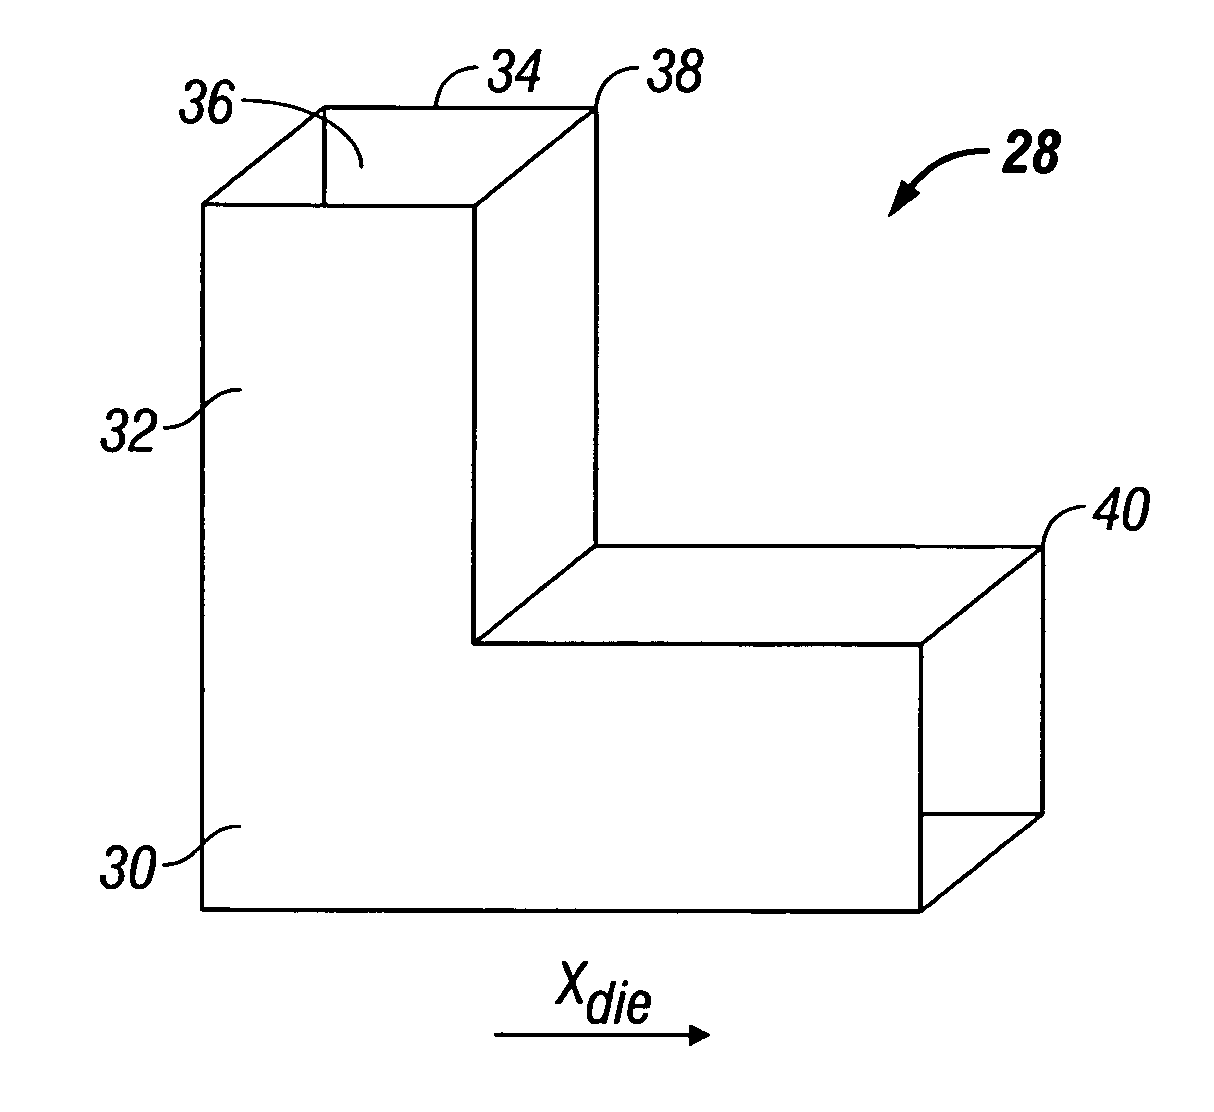 Method of forming a structural component having a NANO sized/sub-micron homogeneous grain structure